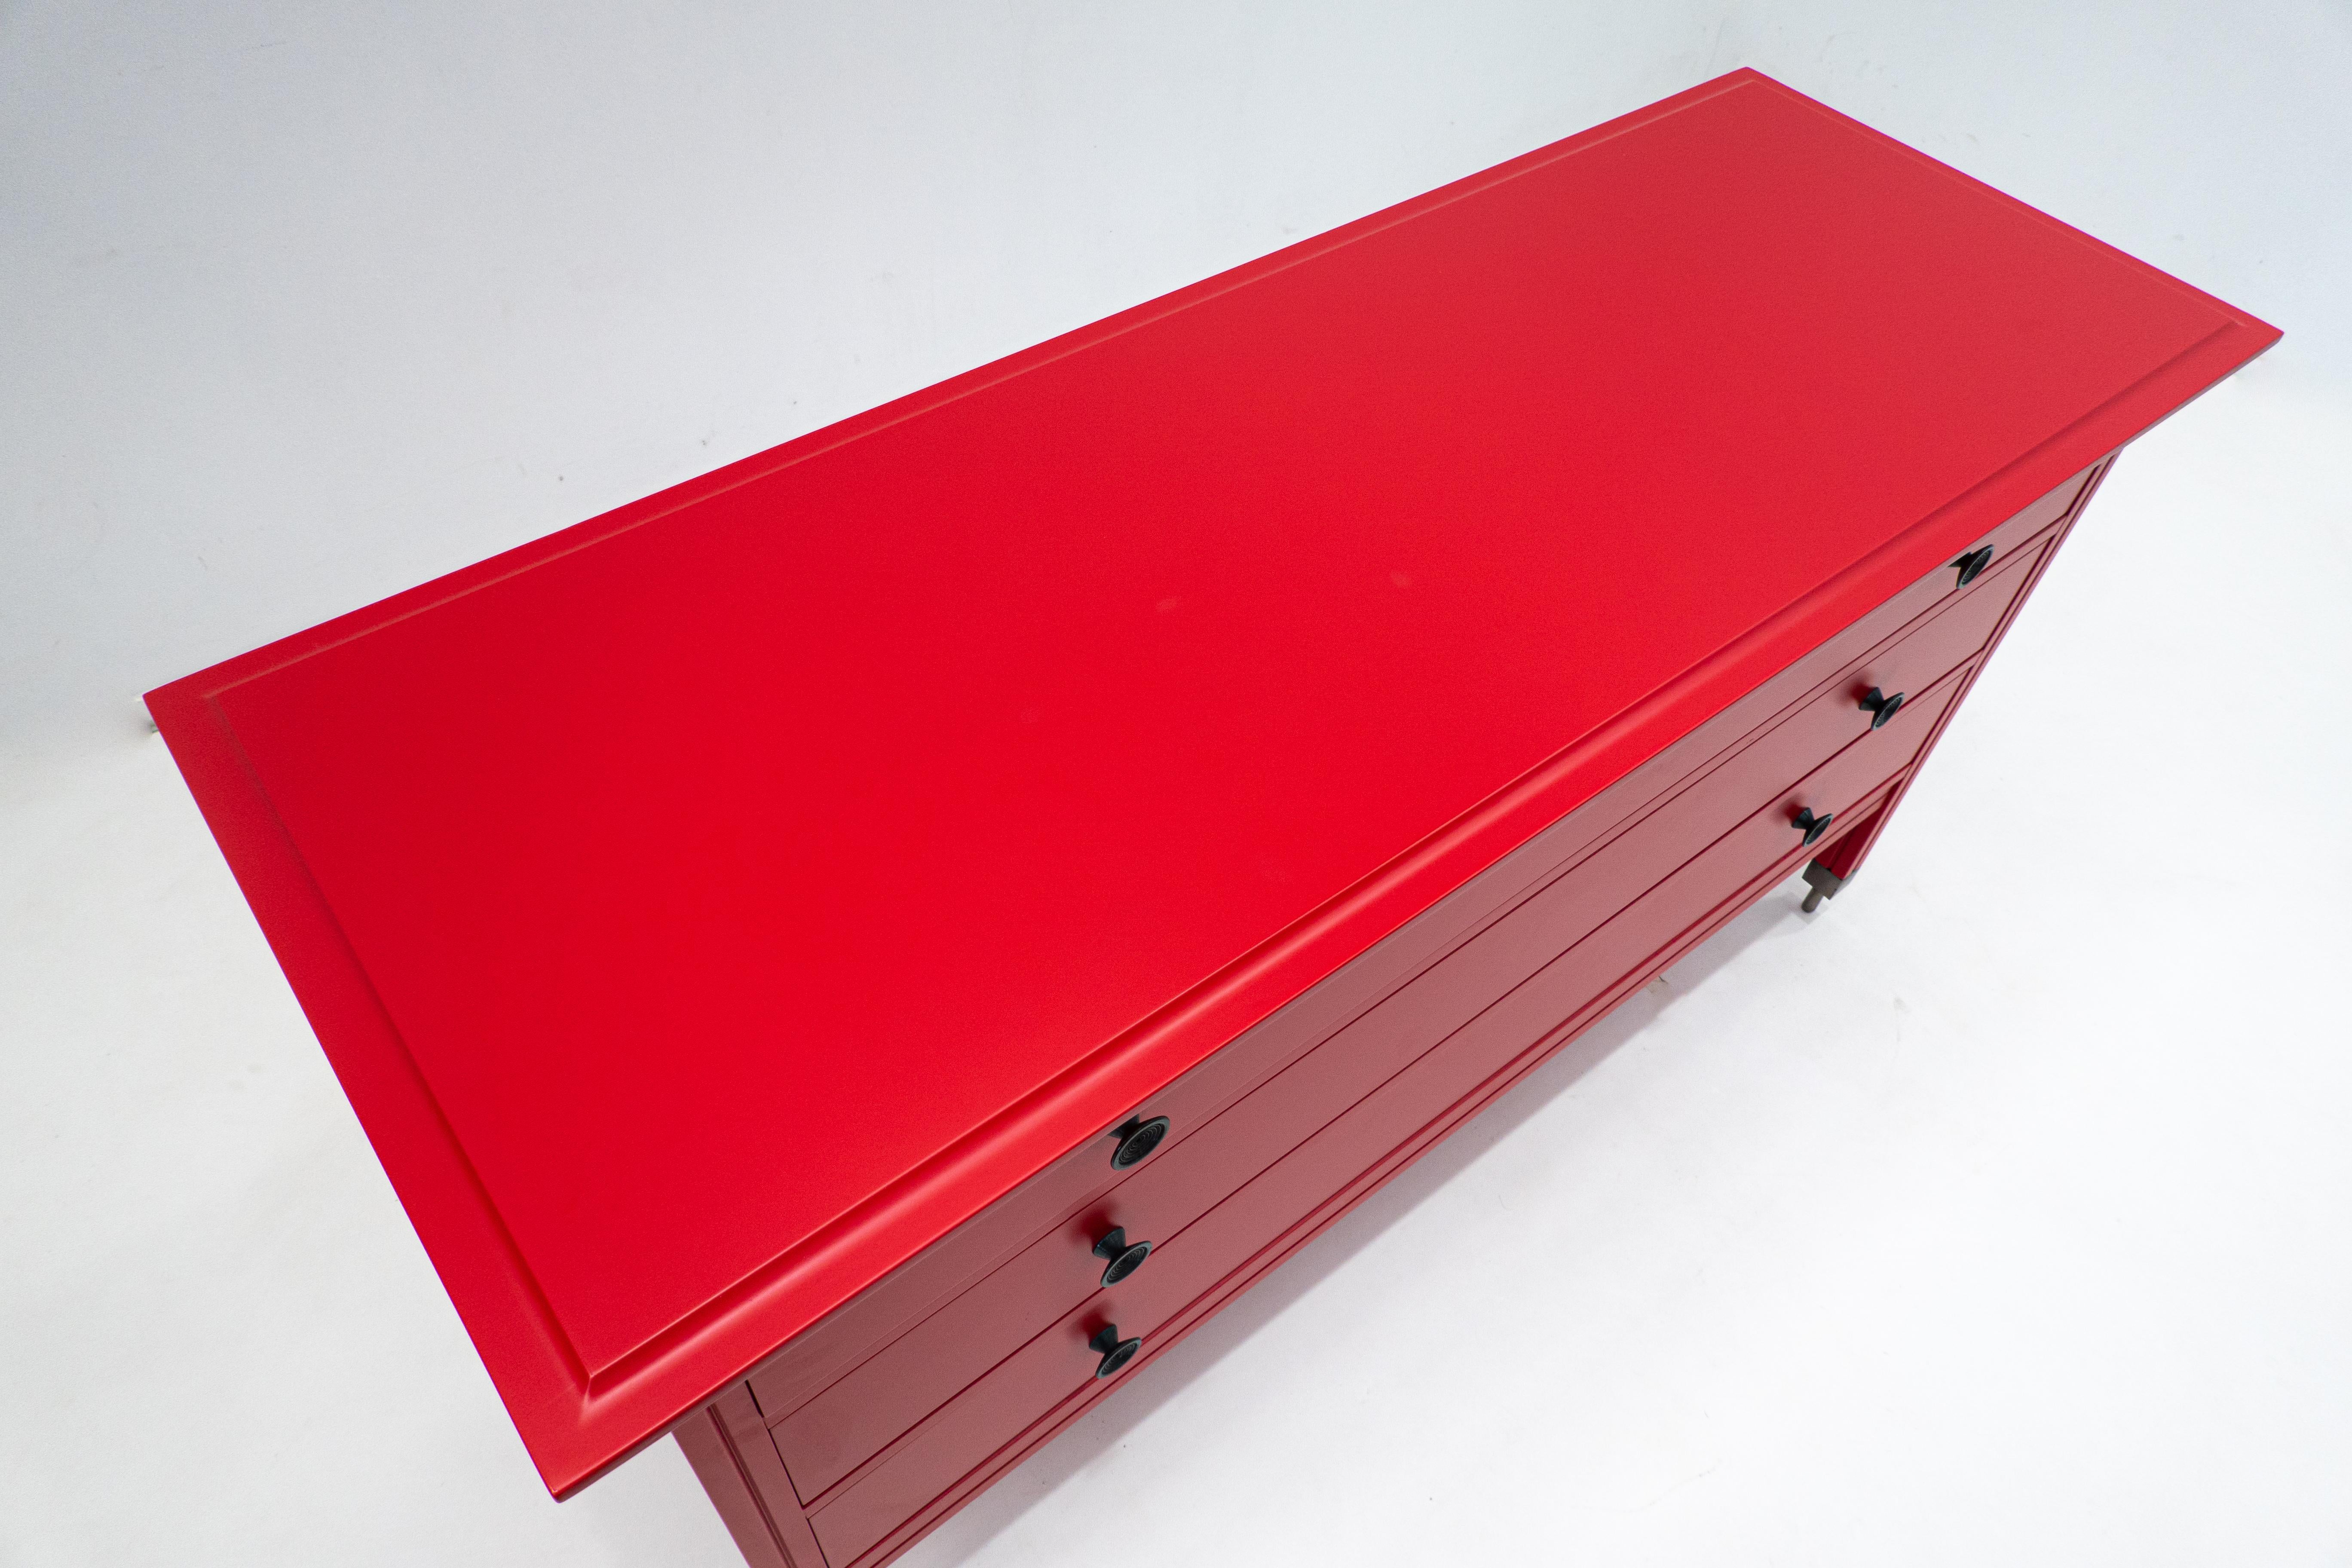 Italian Mid-Century Modern Red Chest of Drawers by Carlo di Carli for Sormani, 1950s